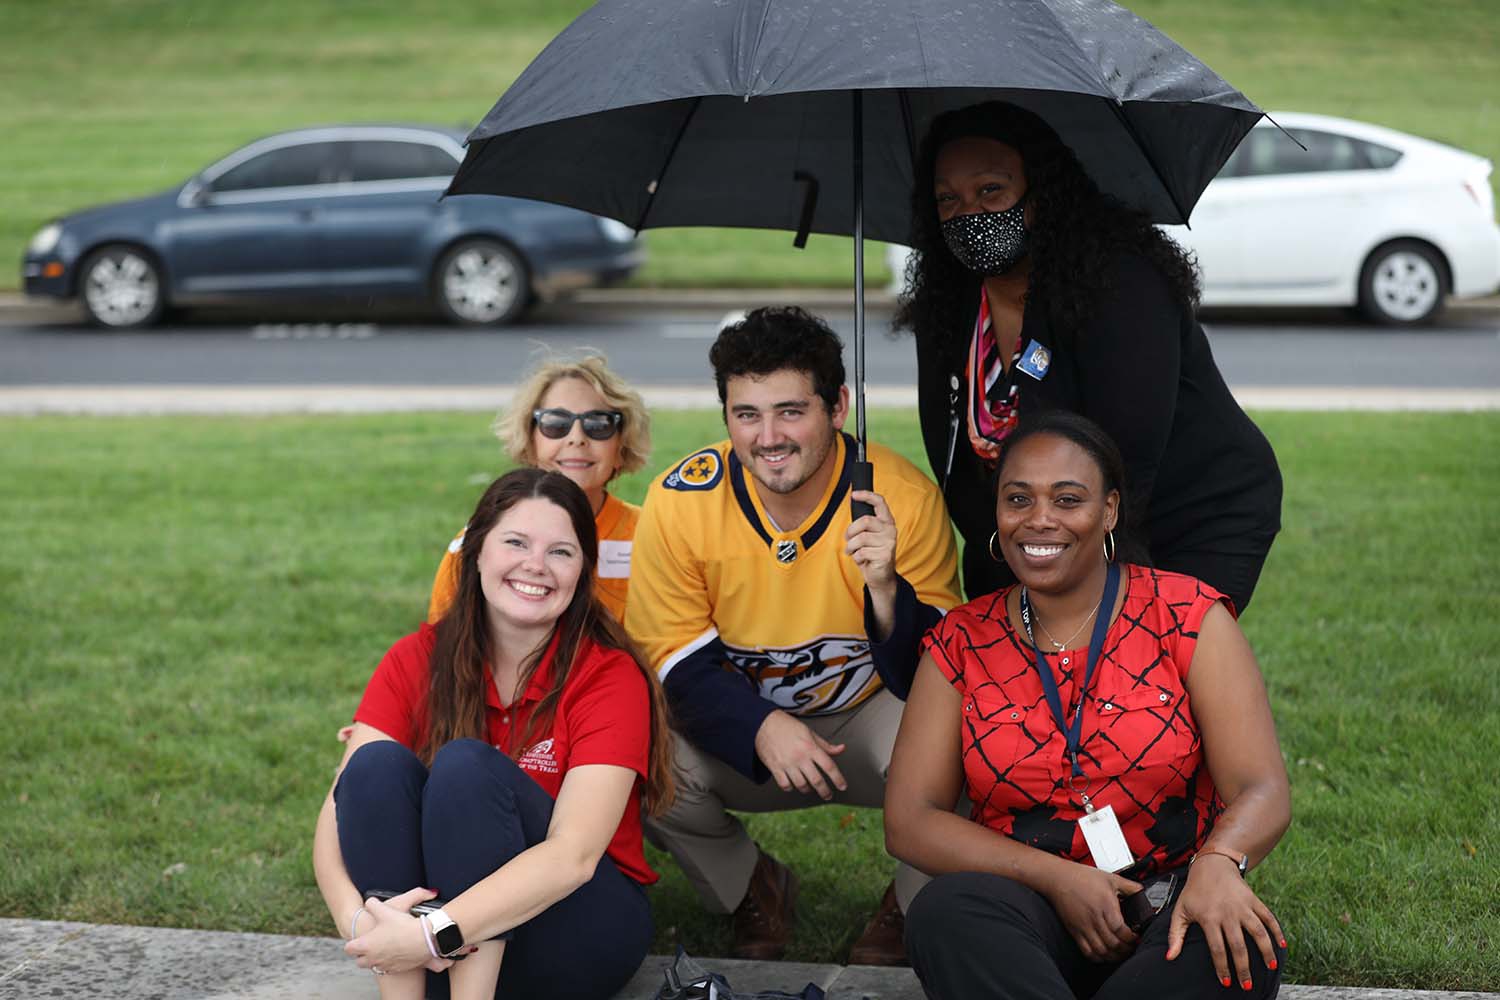 A few drops of rain will not stop these employees from the Comptroller’s Office of State Assessed Properties from enjoying the employee Tailgate at the Comptroller’s main office in Nashville, Tennessee.